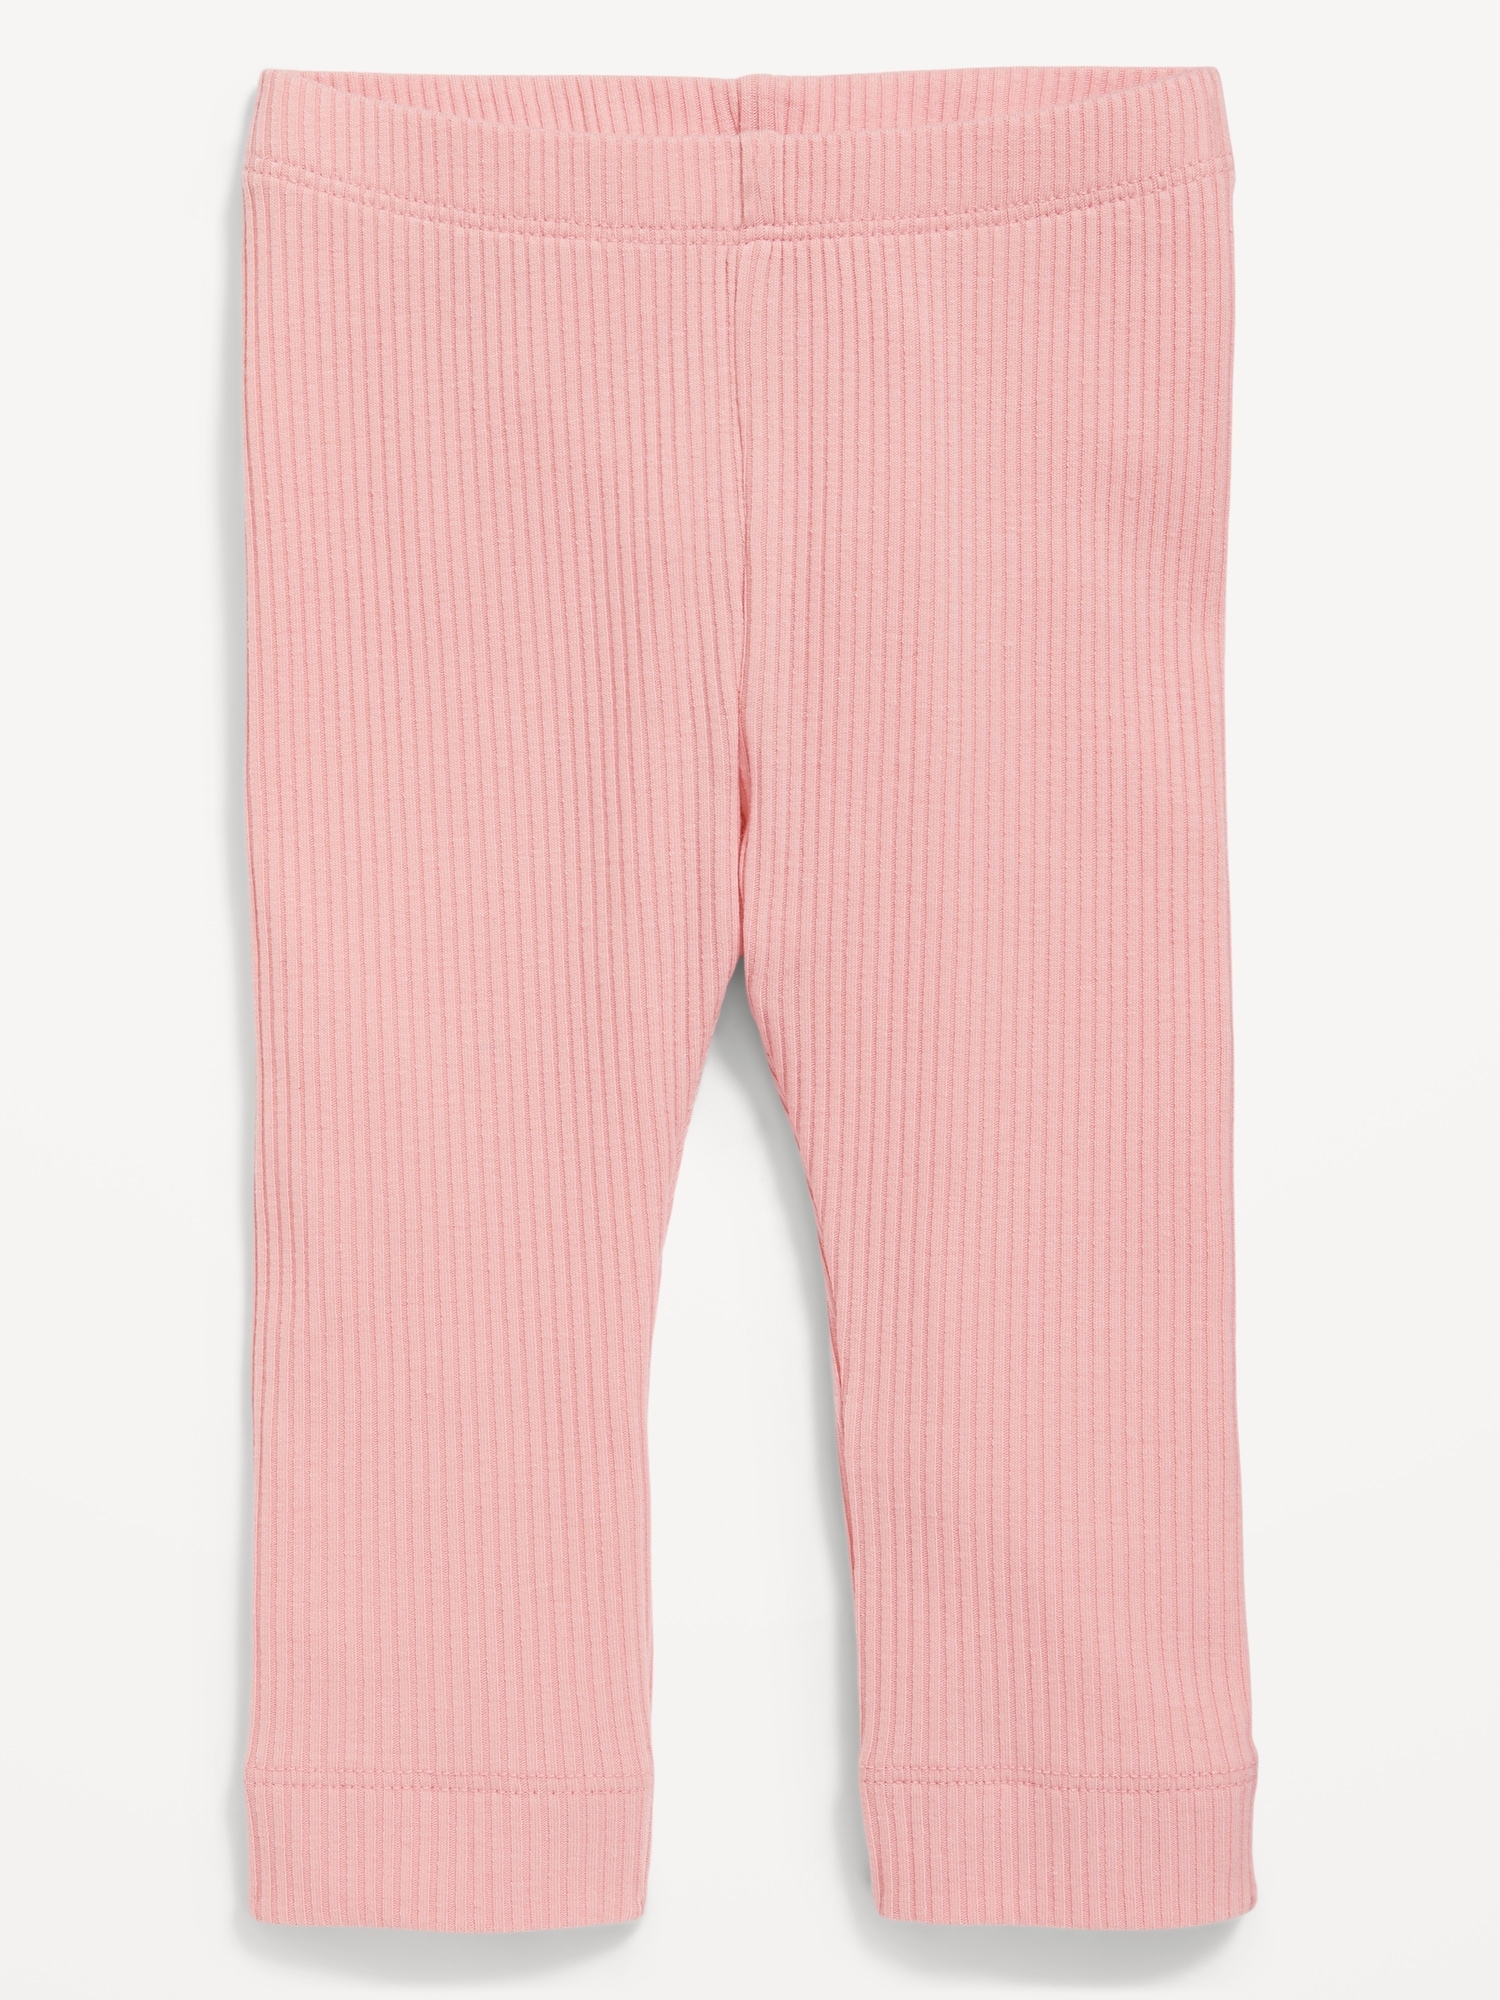 Old Navy Unisex Rib-Knit Leggings for Baby pink. 1